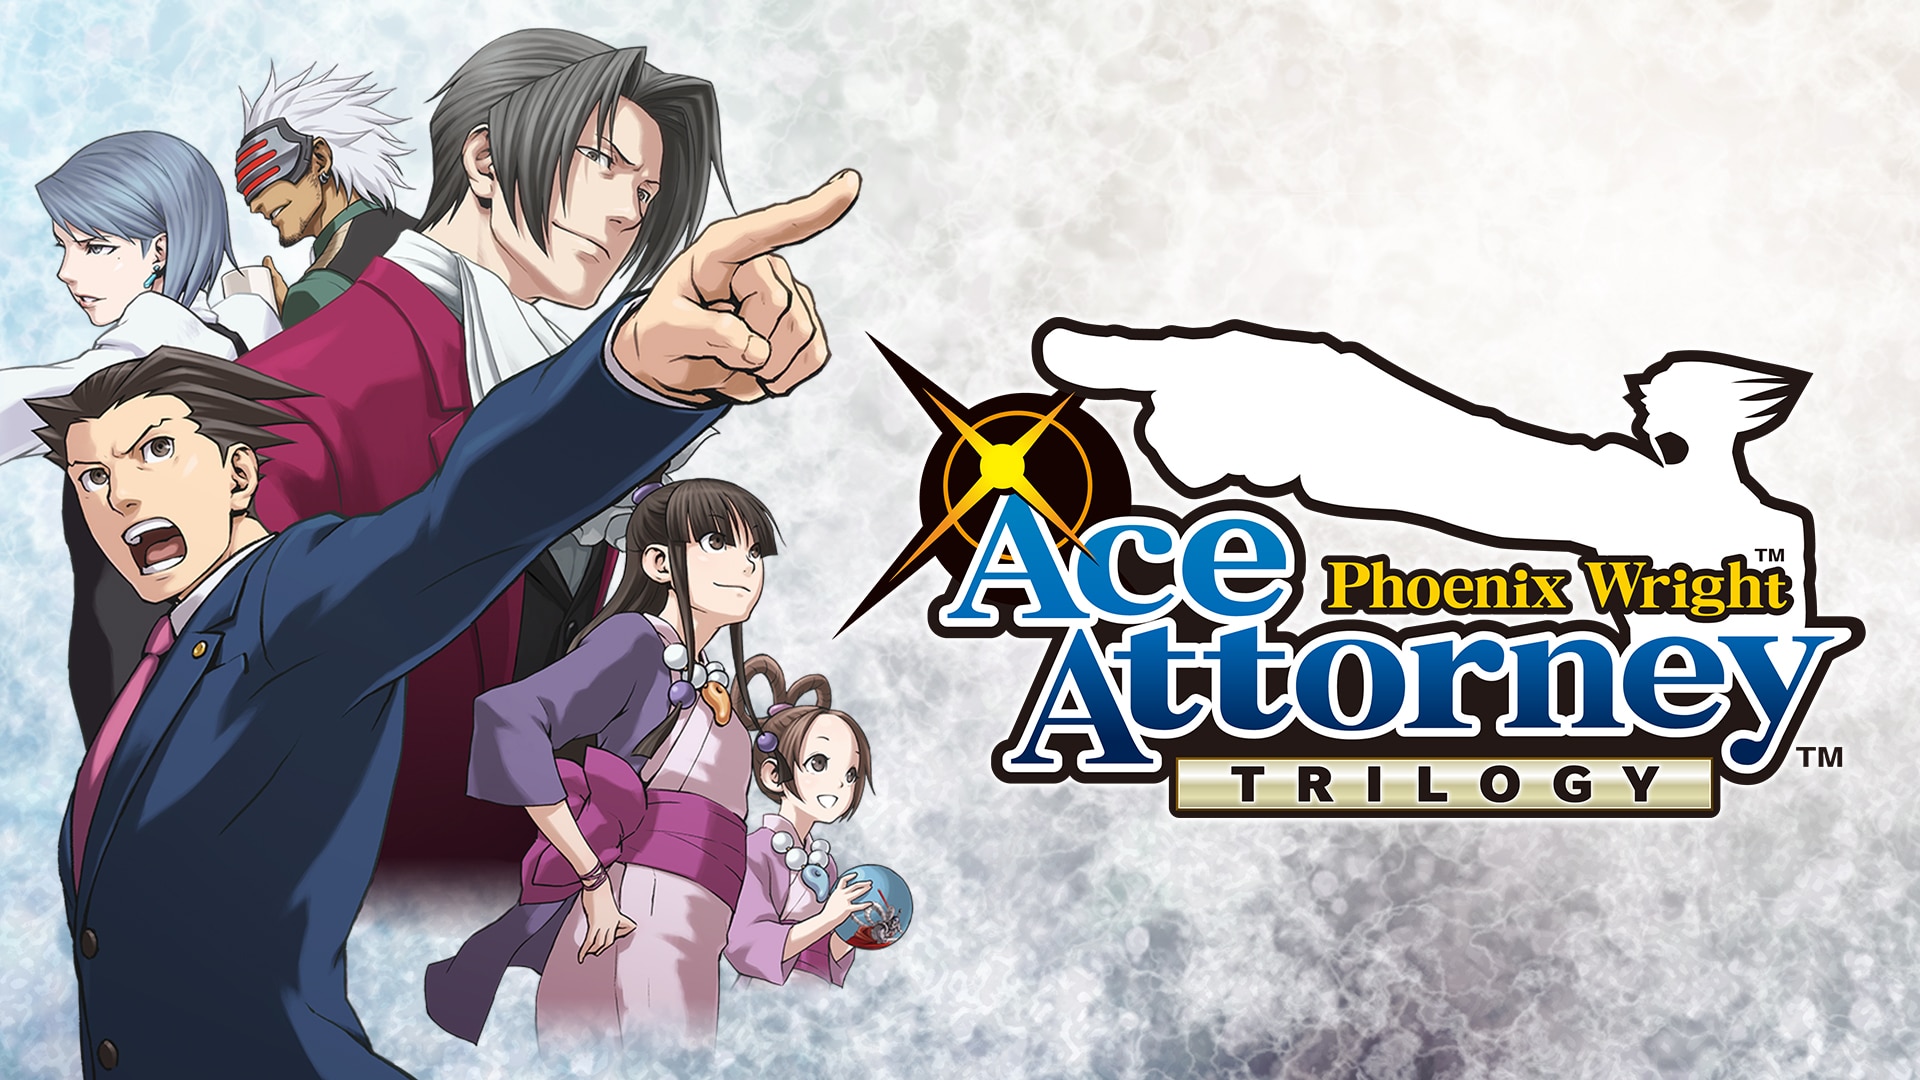 Phoenix Wright: Ace Attorney Trilogy Sells Over 2.3 Million Units Worldwide